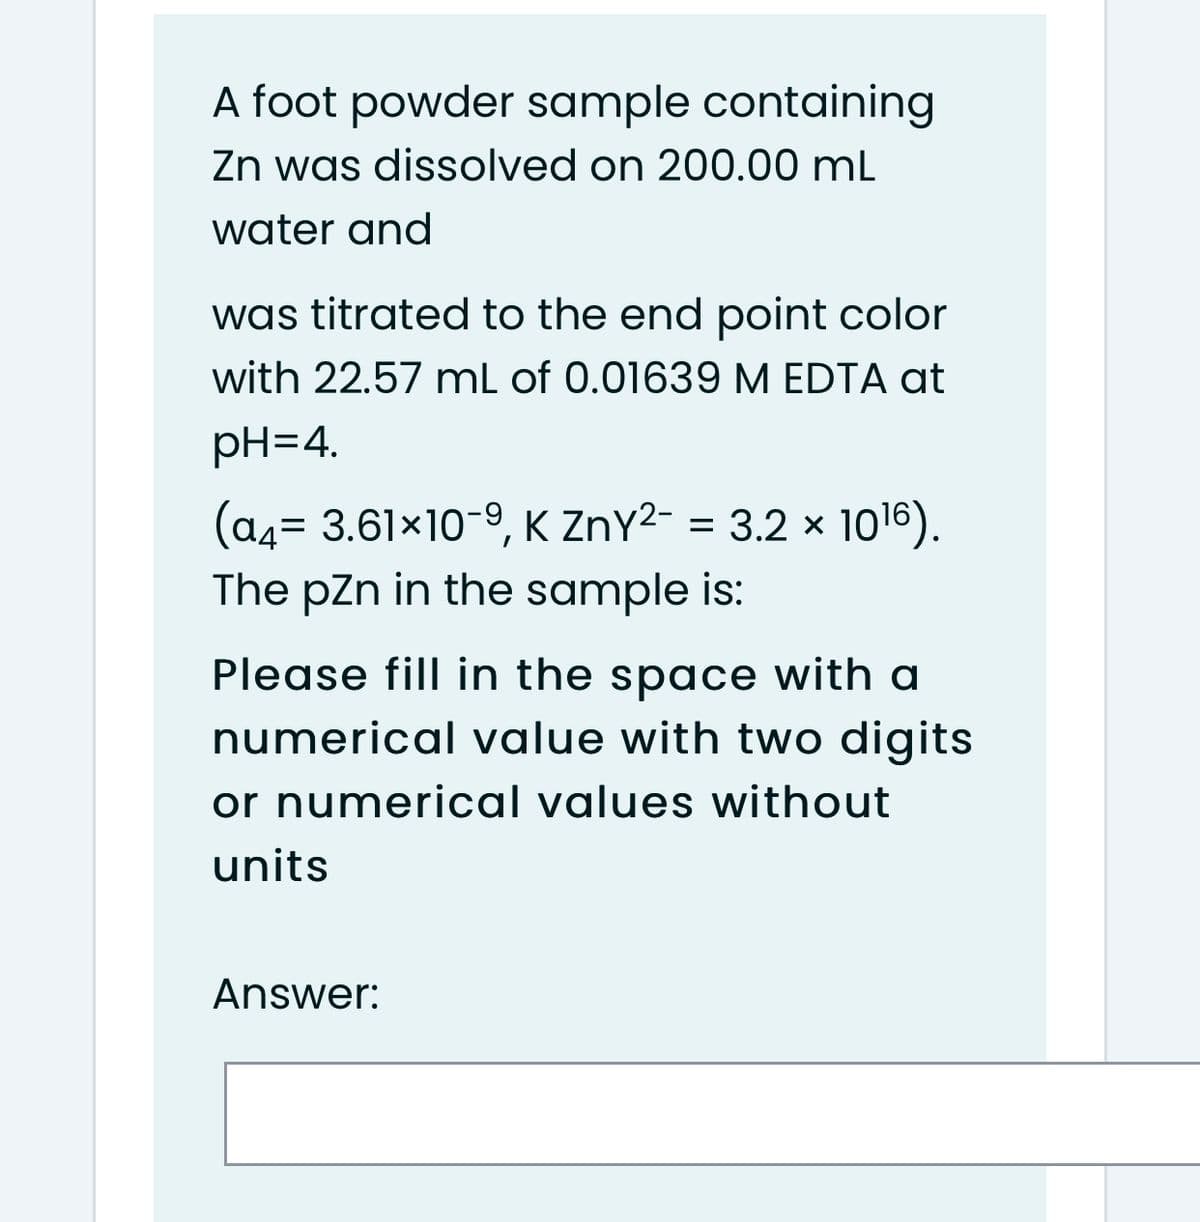 A foot powder sample containing
Zn was dissolved on 200.00 mL
water and
was titrated to the end point color
with 22.57 mL of 0.01639 M EDTA at
pH=4.
(a4= 3.61x10-9, K ZnY2- = 3.2 x 1o16).
The pzn in the sample is:
Please fill in the space with a
numerical value with two digits
or numerical values without
units
Answer:
